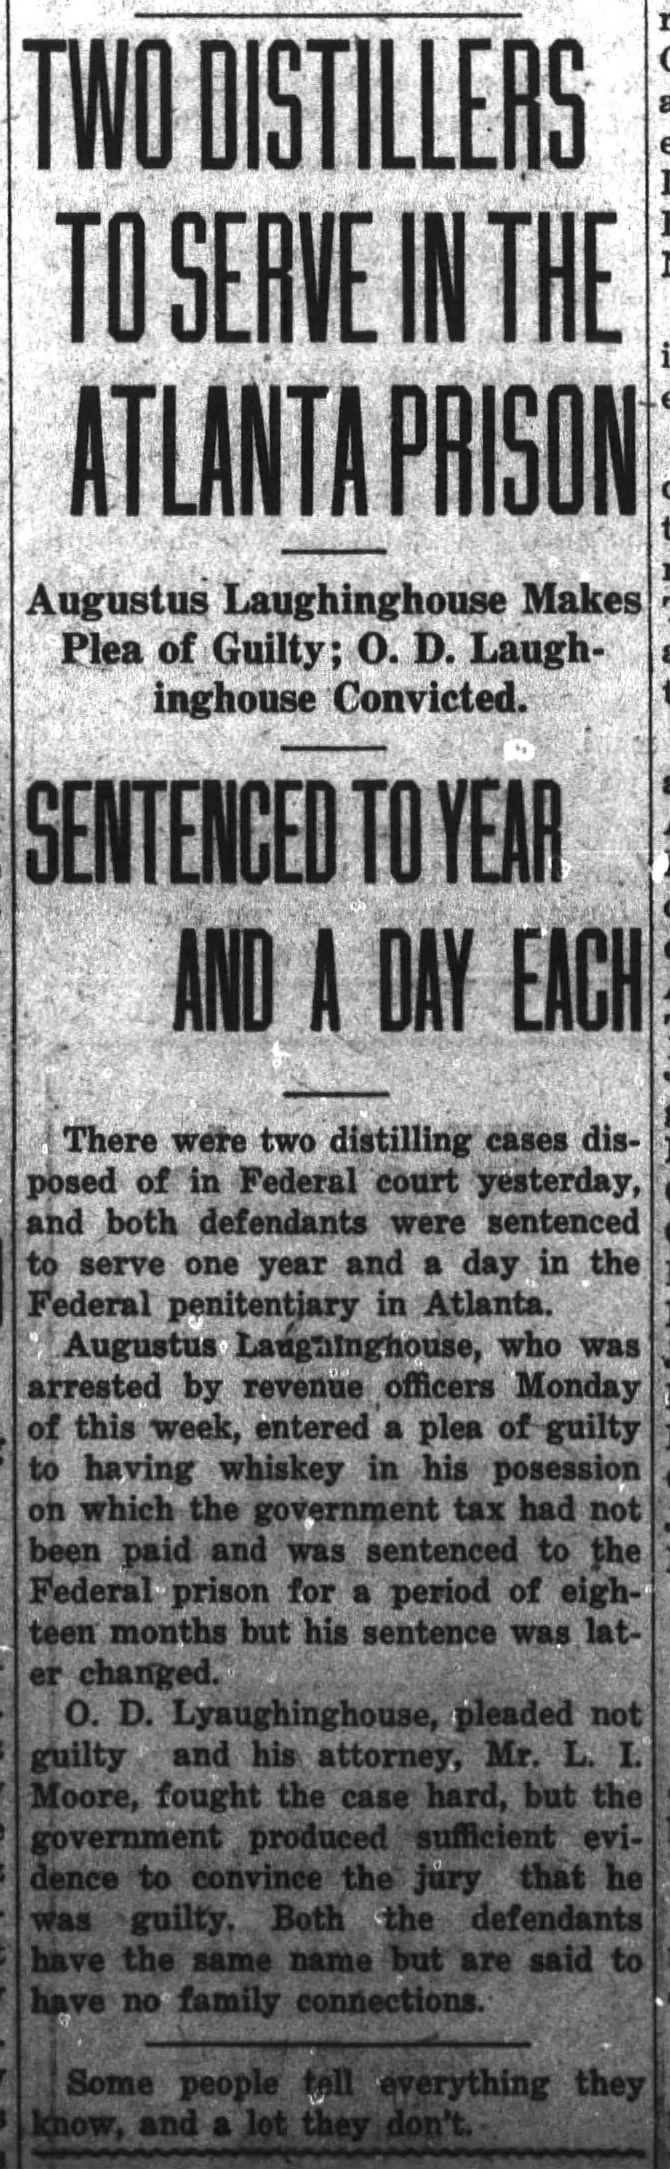 Augustus Laughinghouse and Oddie Laughinghouse to serve time in Atlanta Prison (Bootlegging)